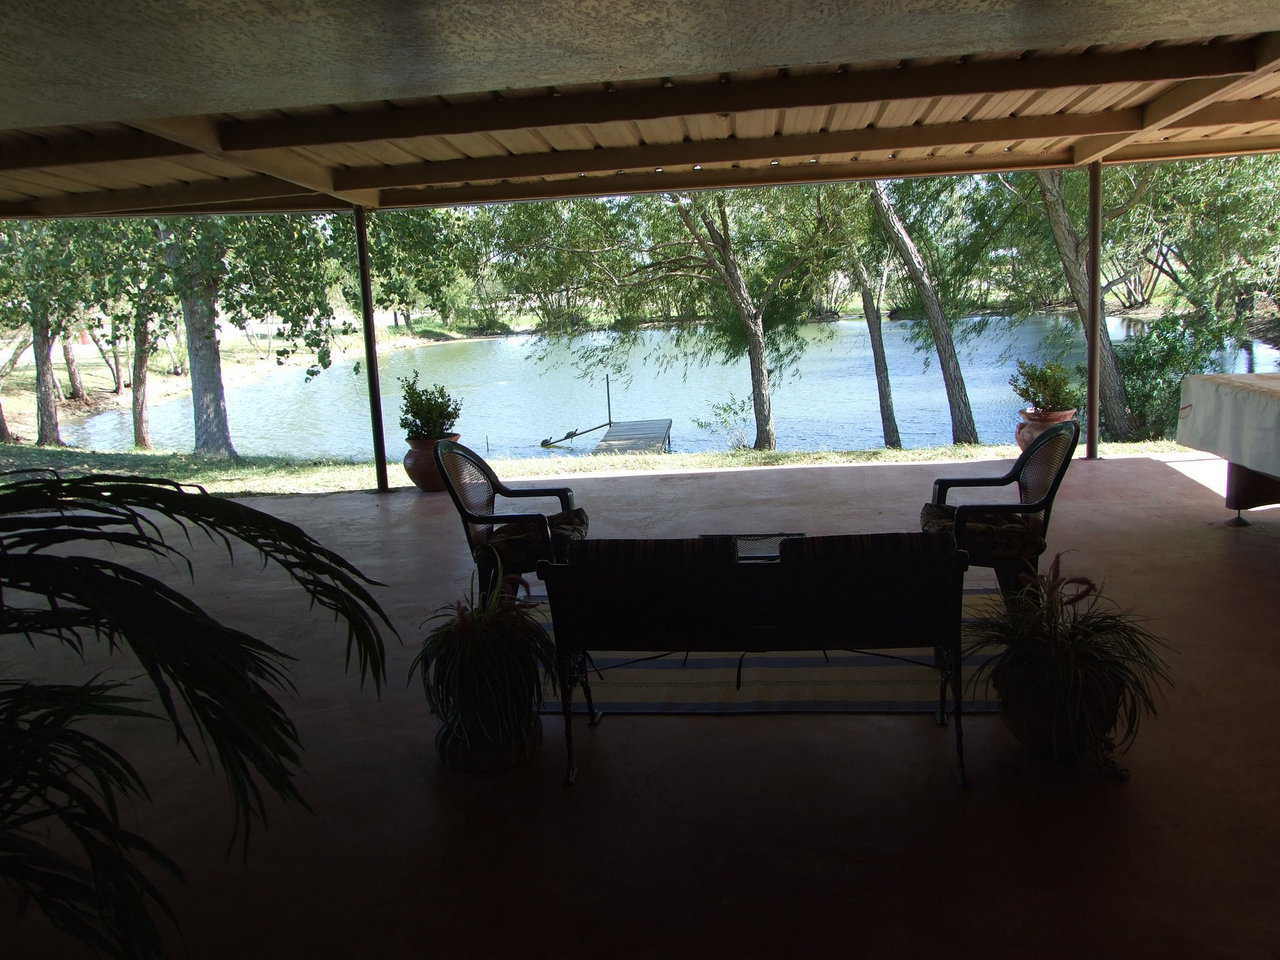 Patio — Its large, comfortable patio is an integral part of Charca Casa.